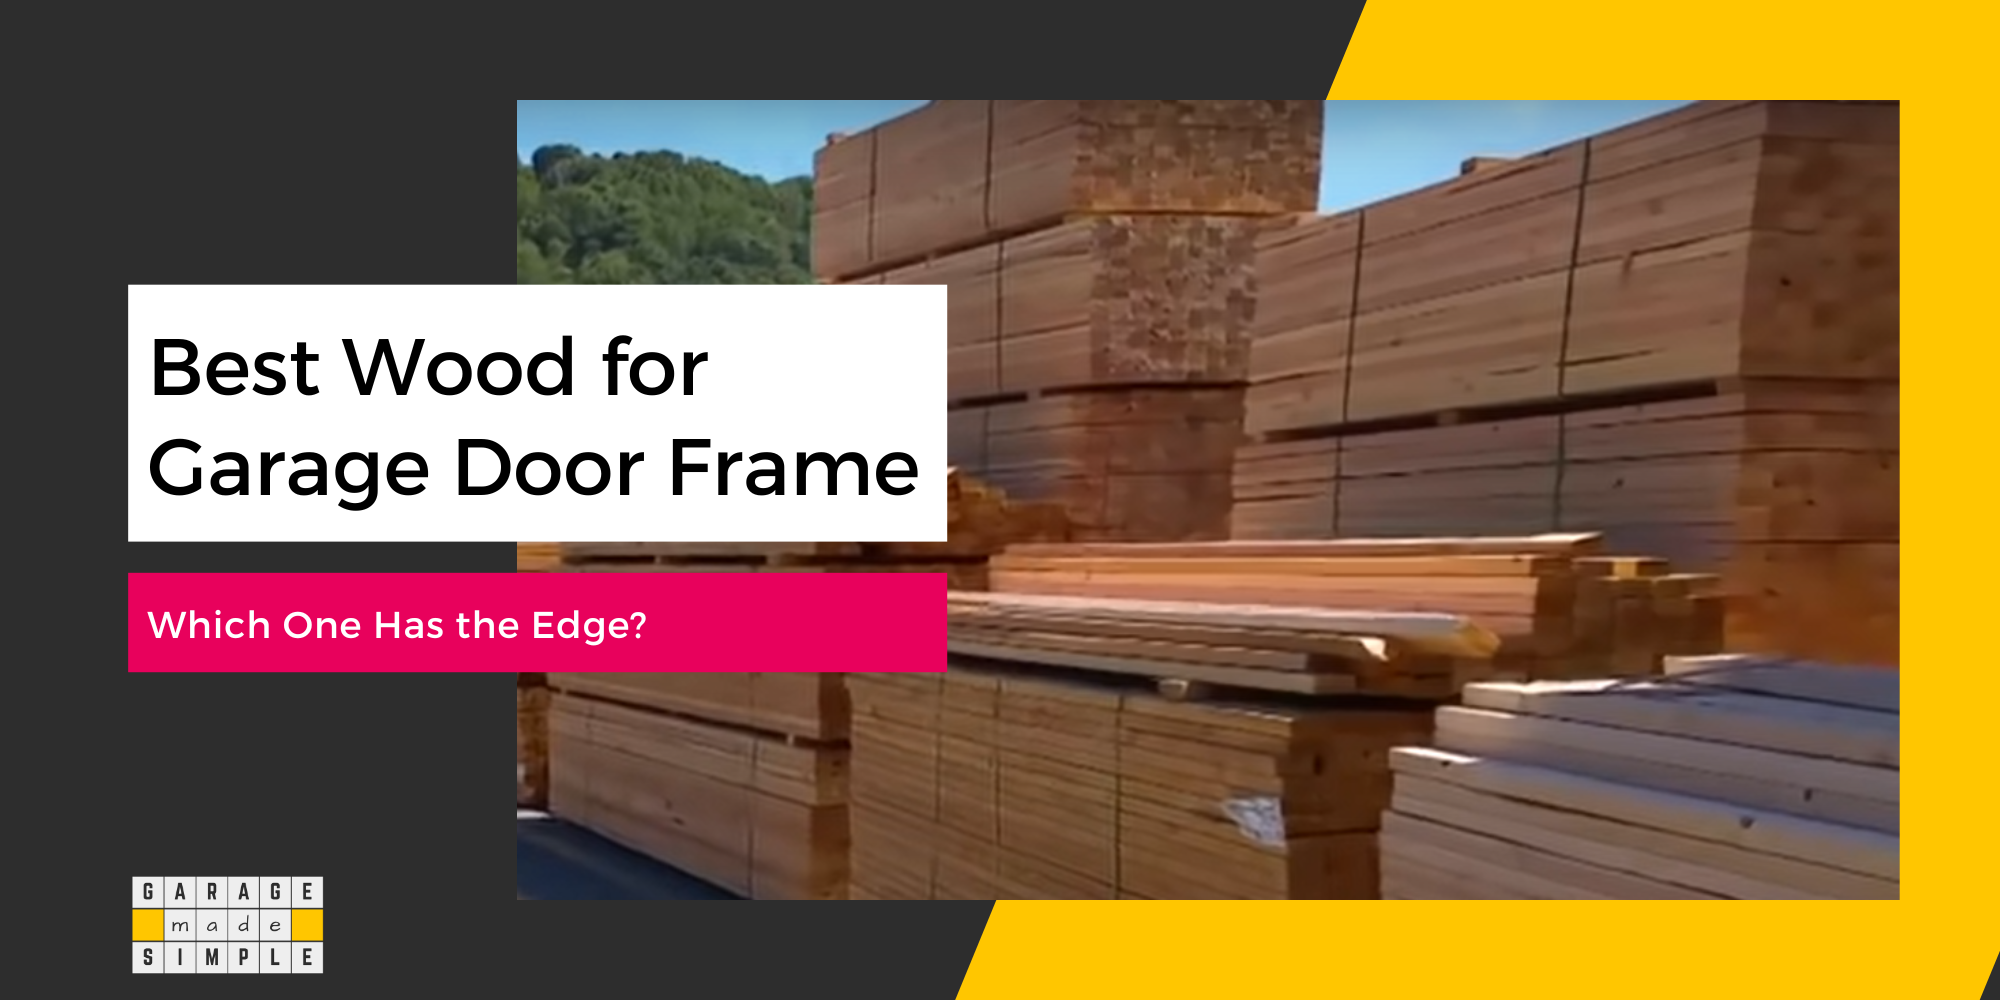 Best Wood for Garage Door Frame: Which One Has the Edge?